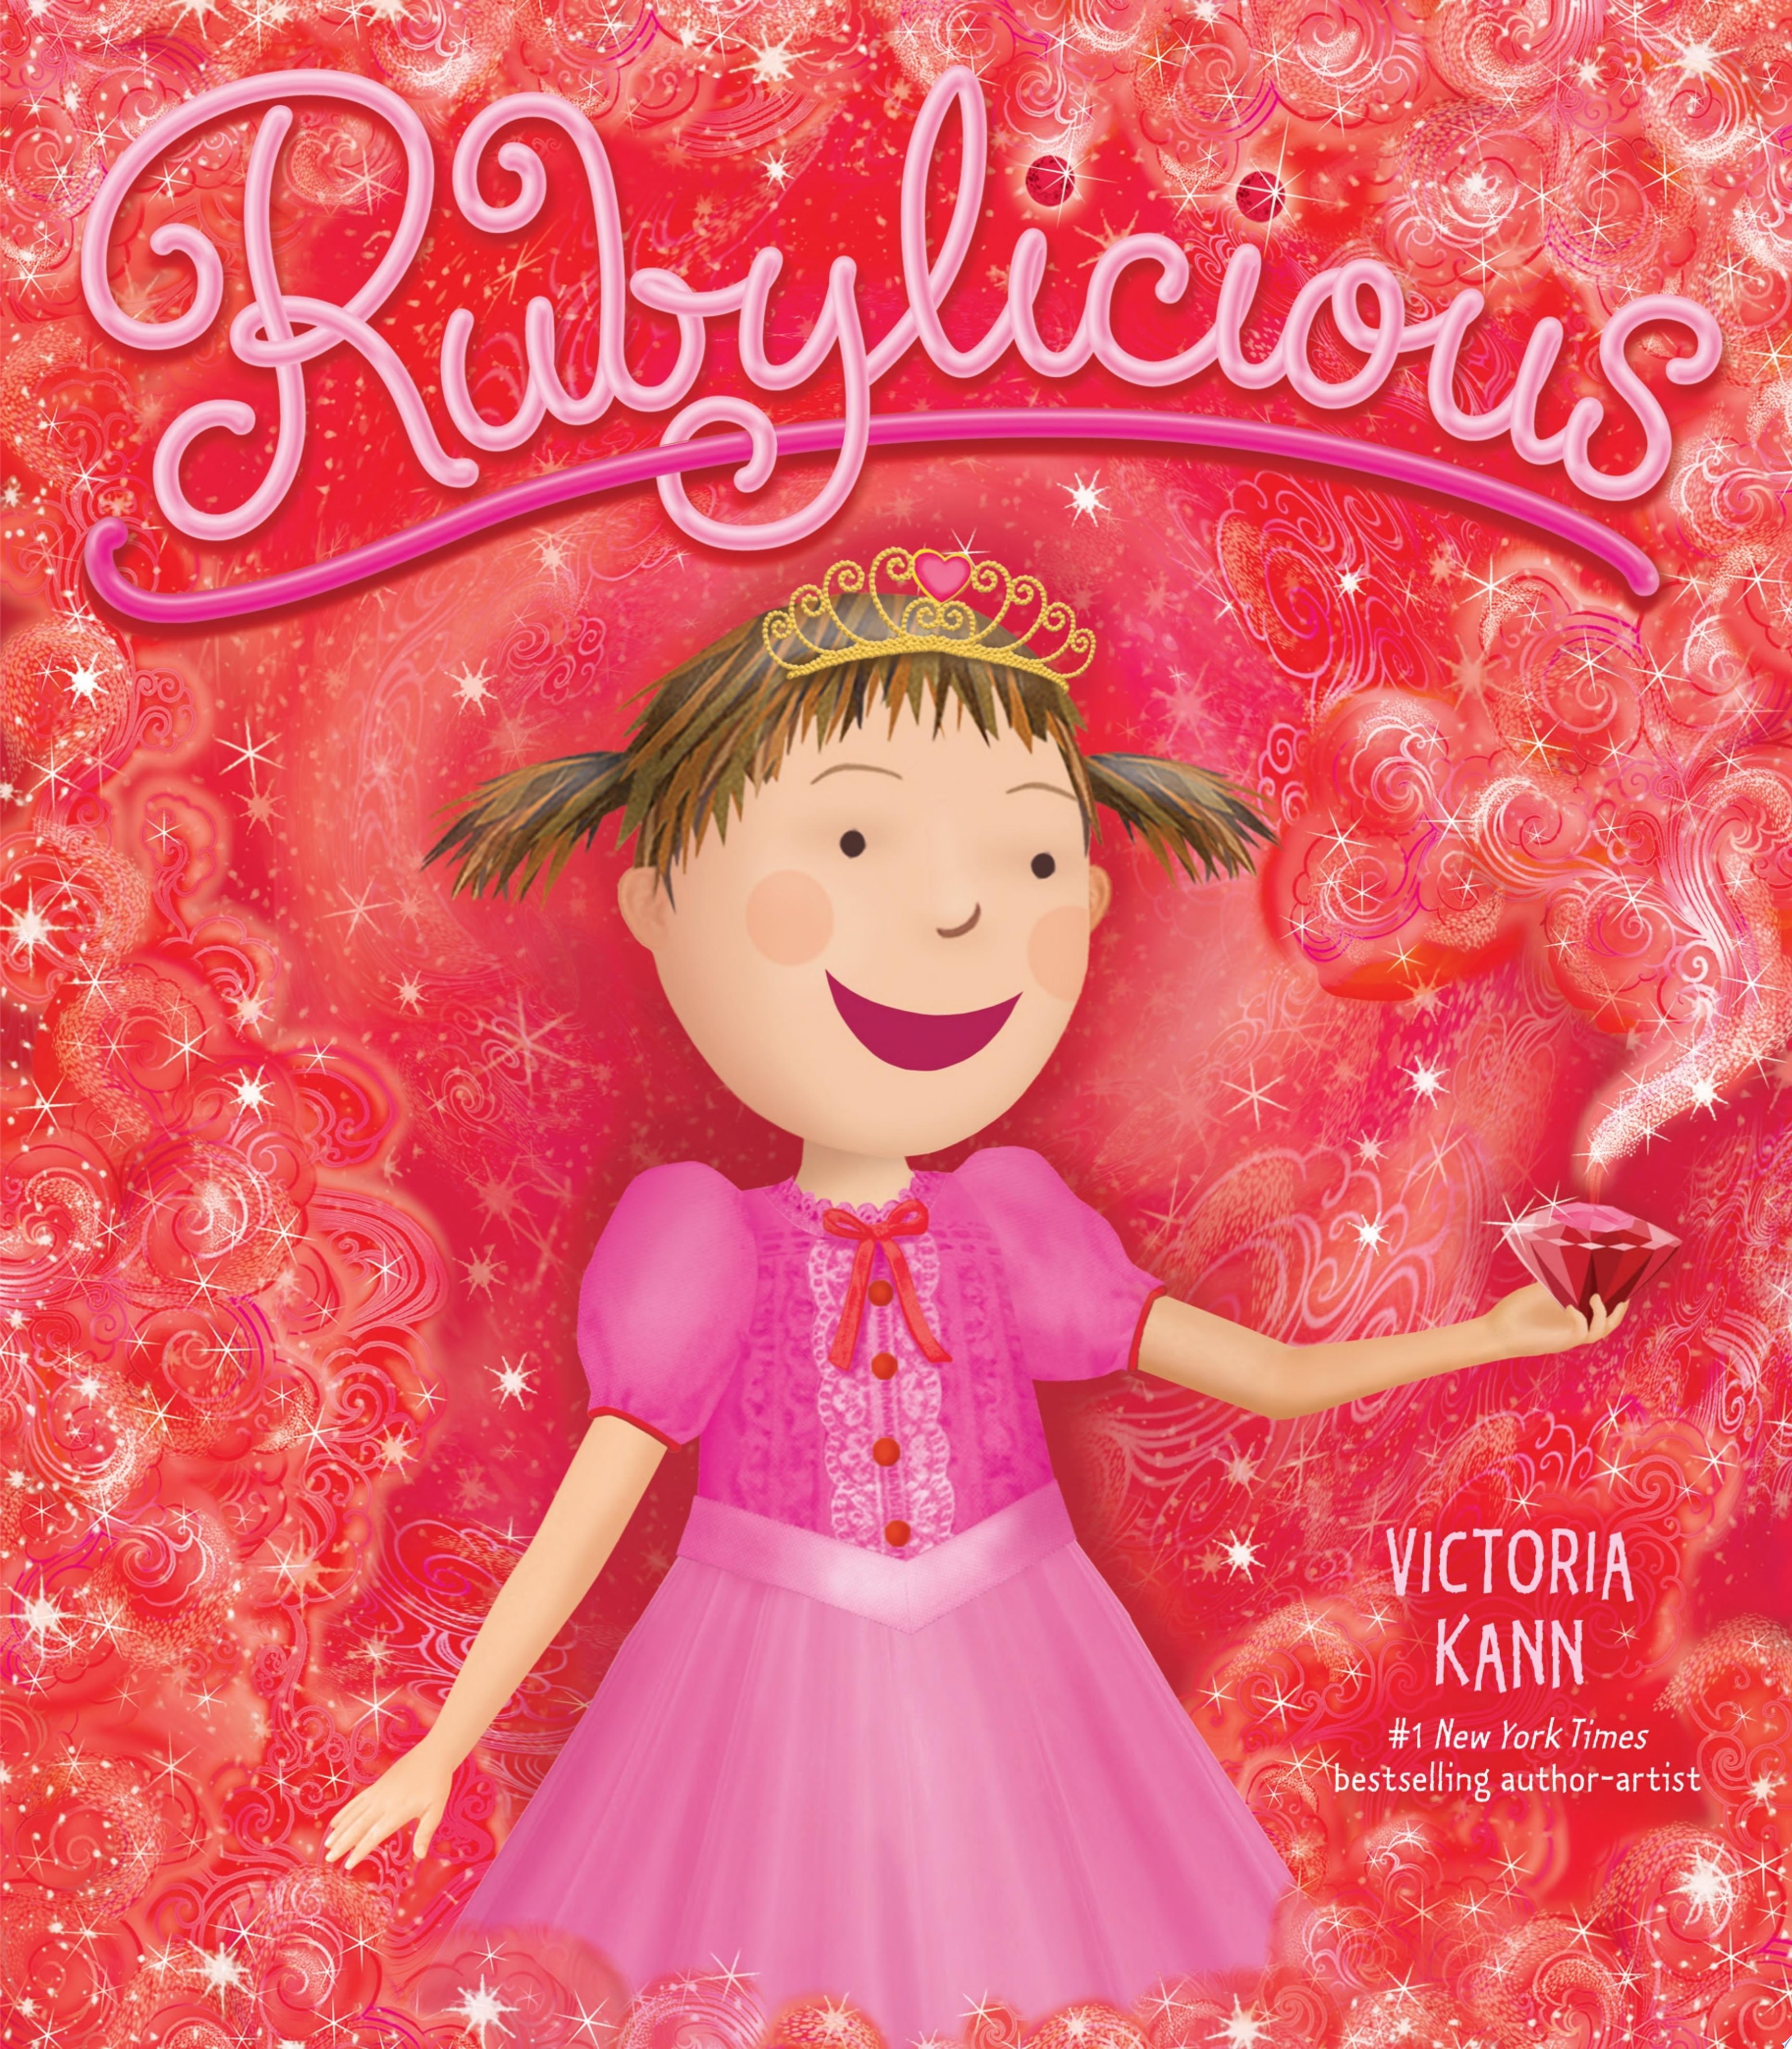 Image for "Rubylicious"